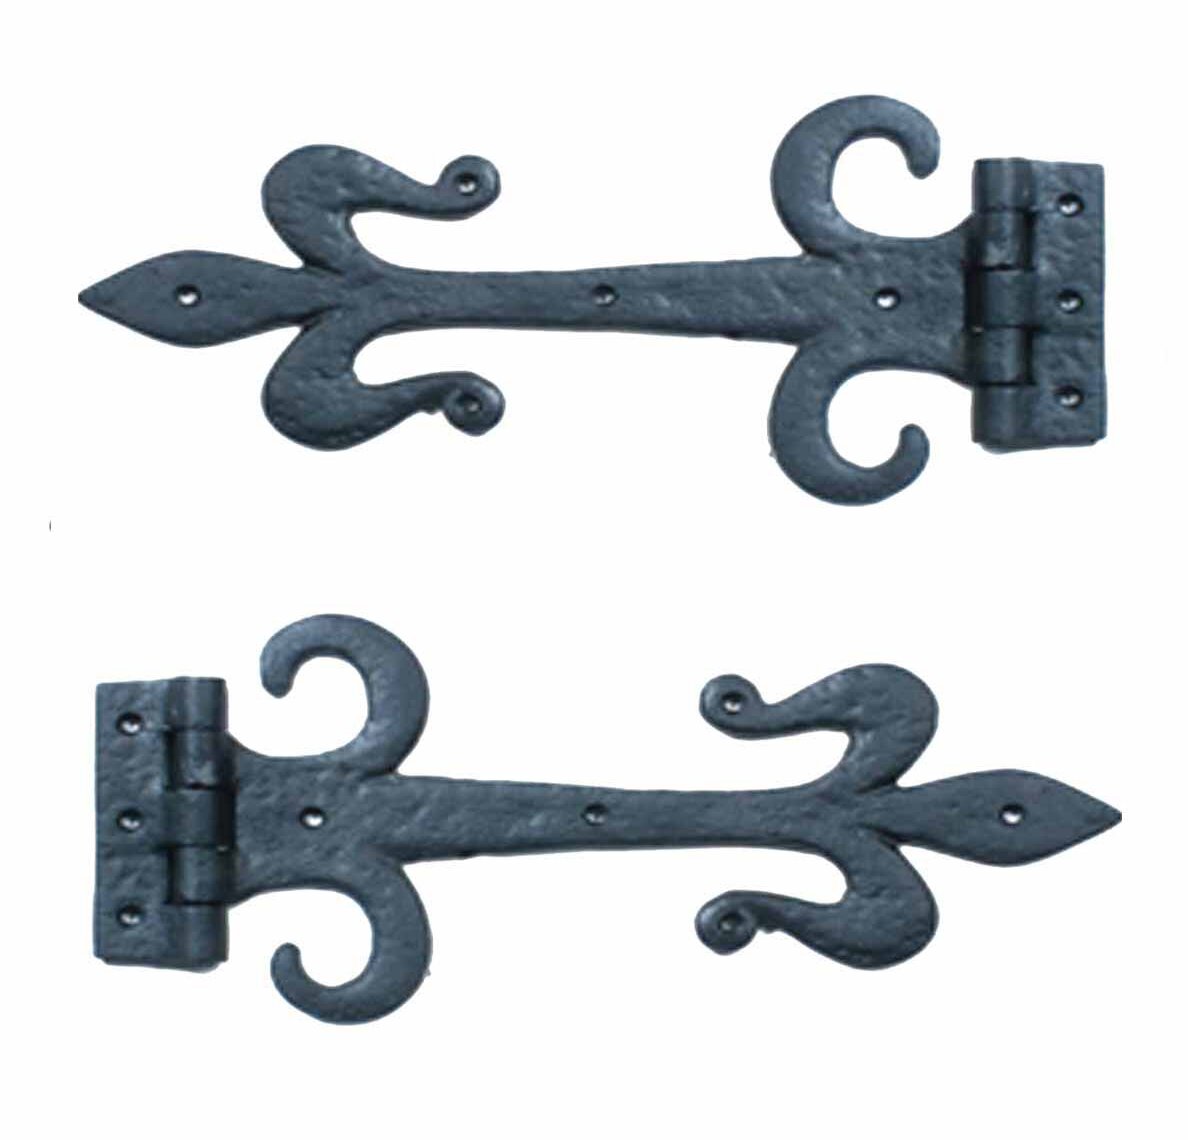 Pair of Small Decorative Cast Iron Cabinet Hinges - 1 1/4 H x 2 1/8 W